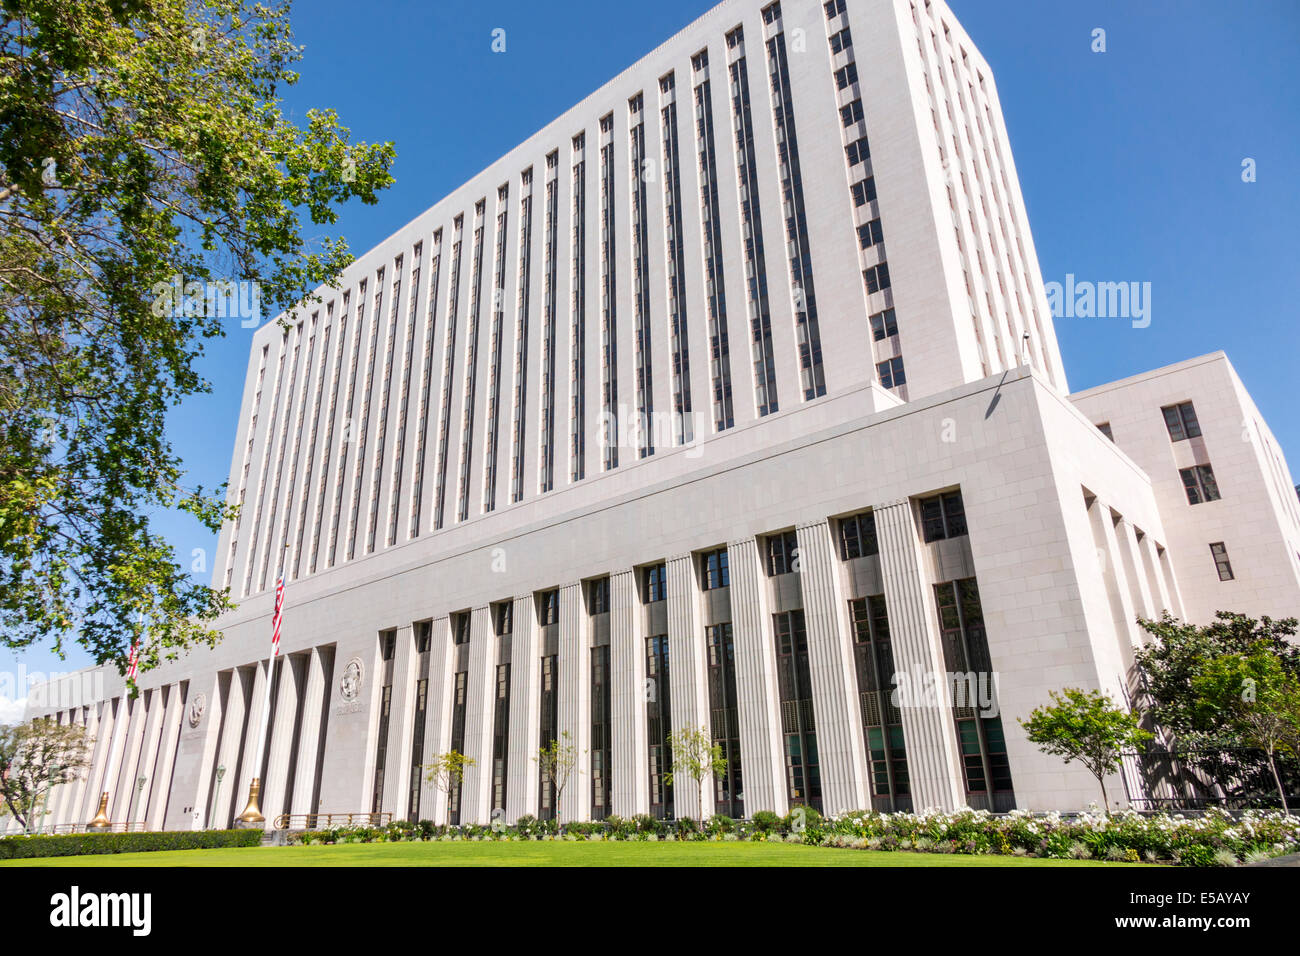 Los Angeles California,Downtown,Civic Center district,United States Court House,federal court,judicial branch,Art Moderne,architecture 1940,historic b Stock Photo